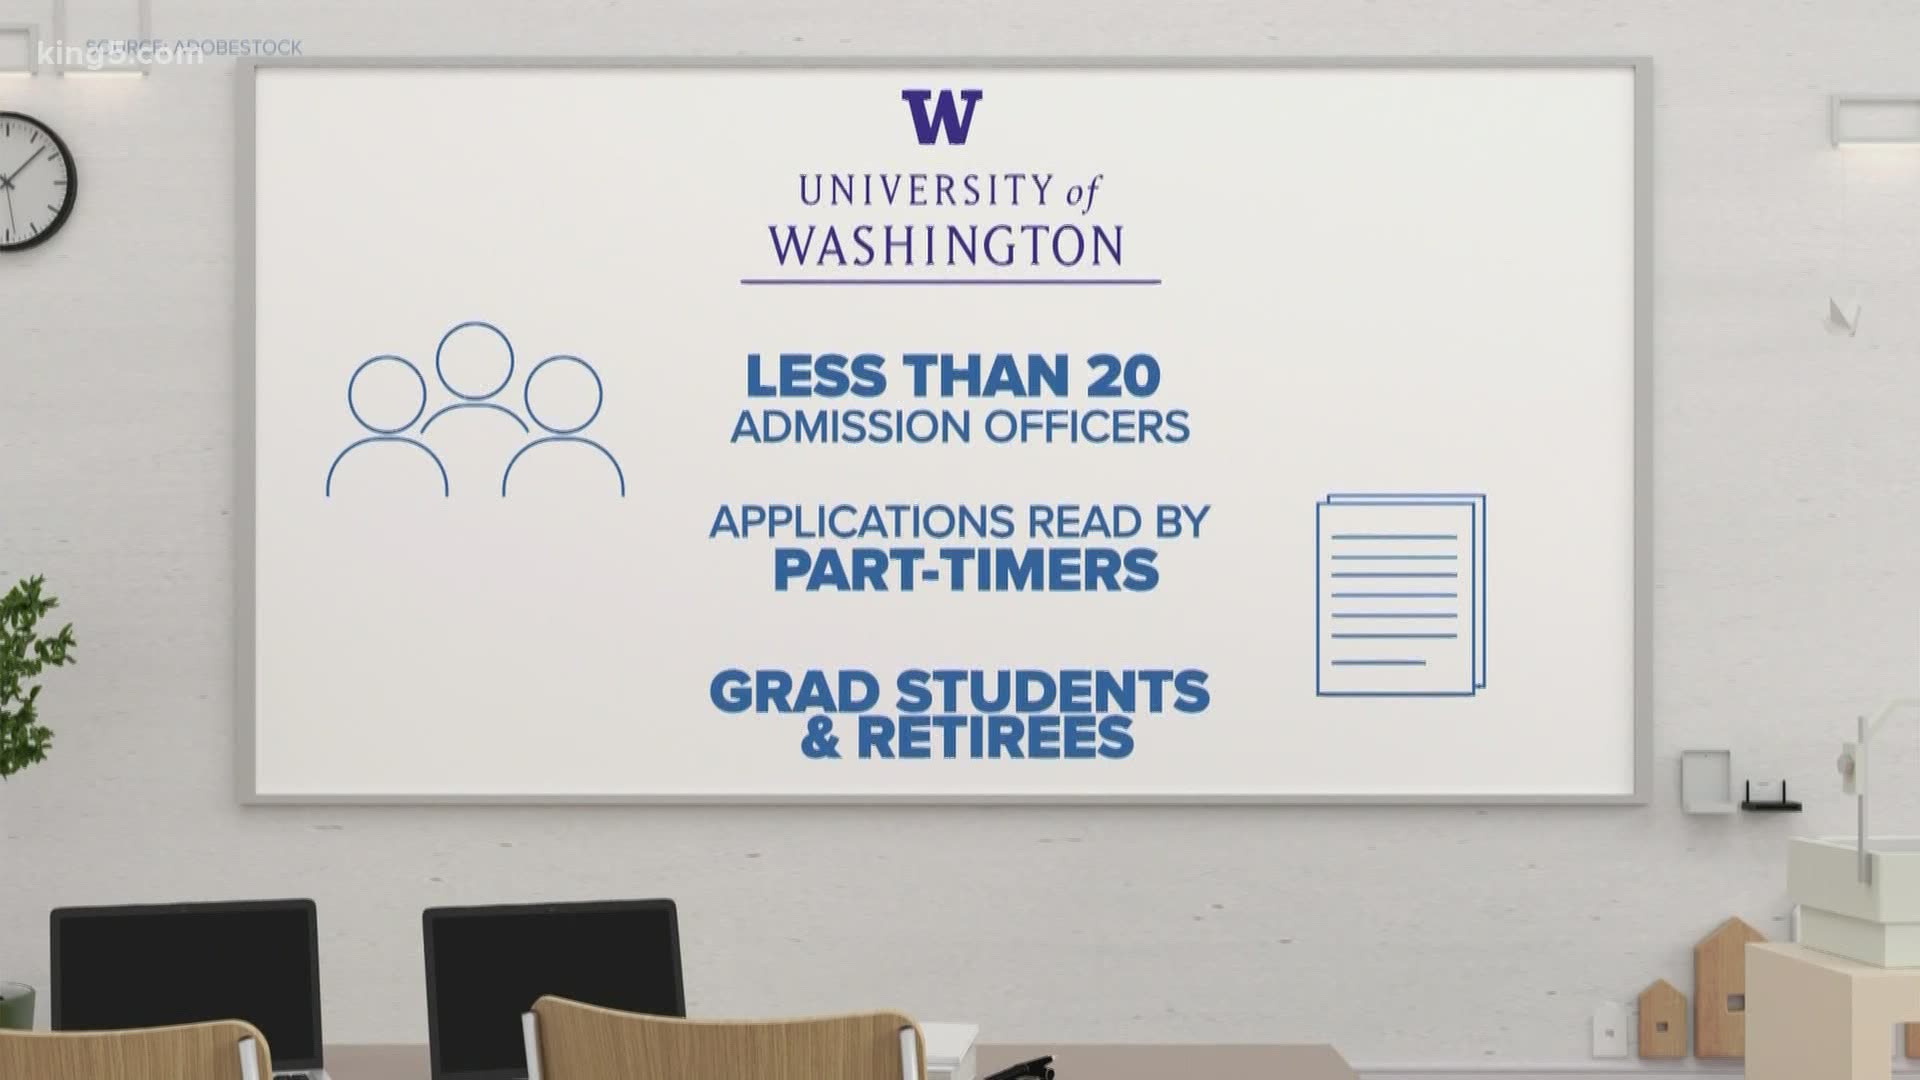 College admissions are often a process kept behind closed doors, but the UW wants to be a transparent example of how a public university builds its class.